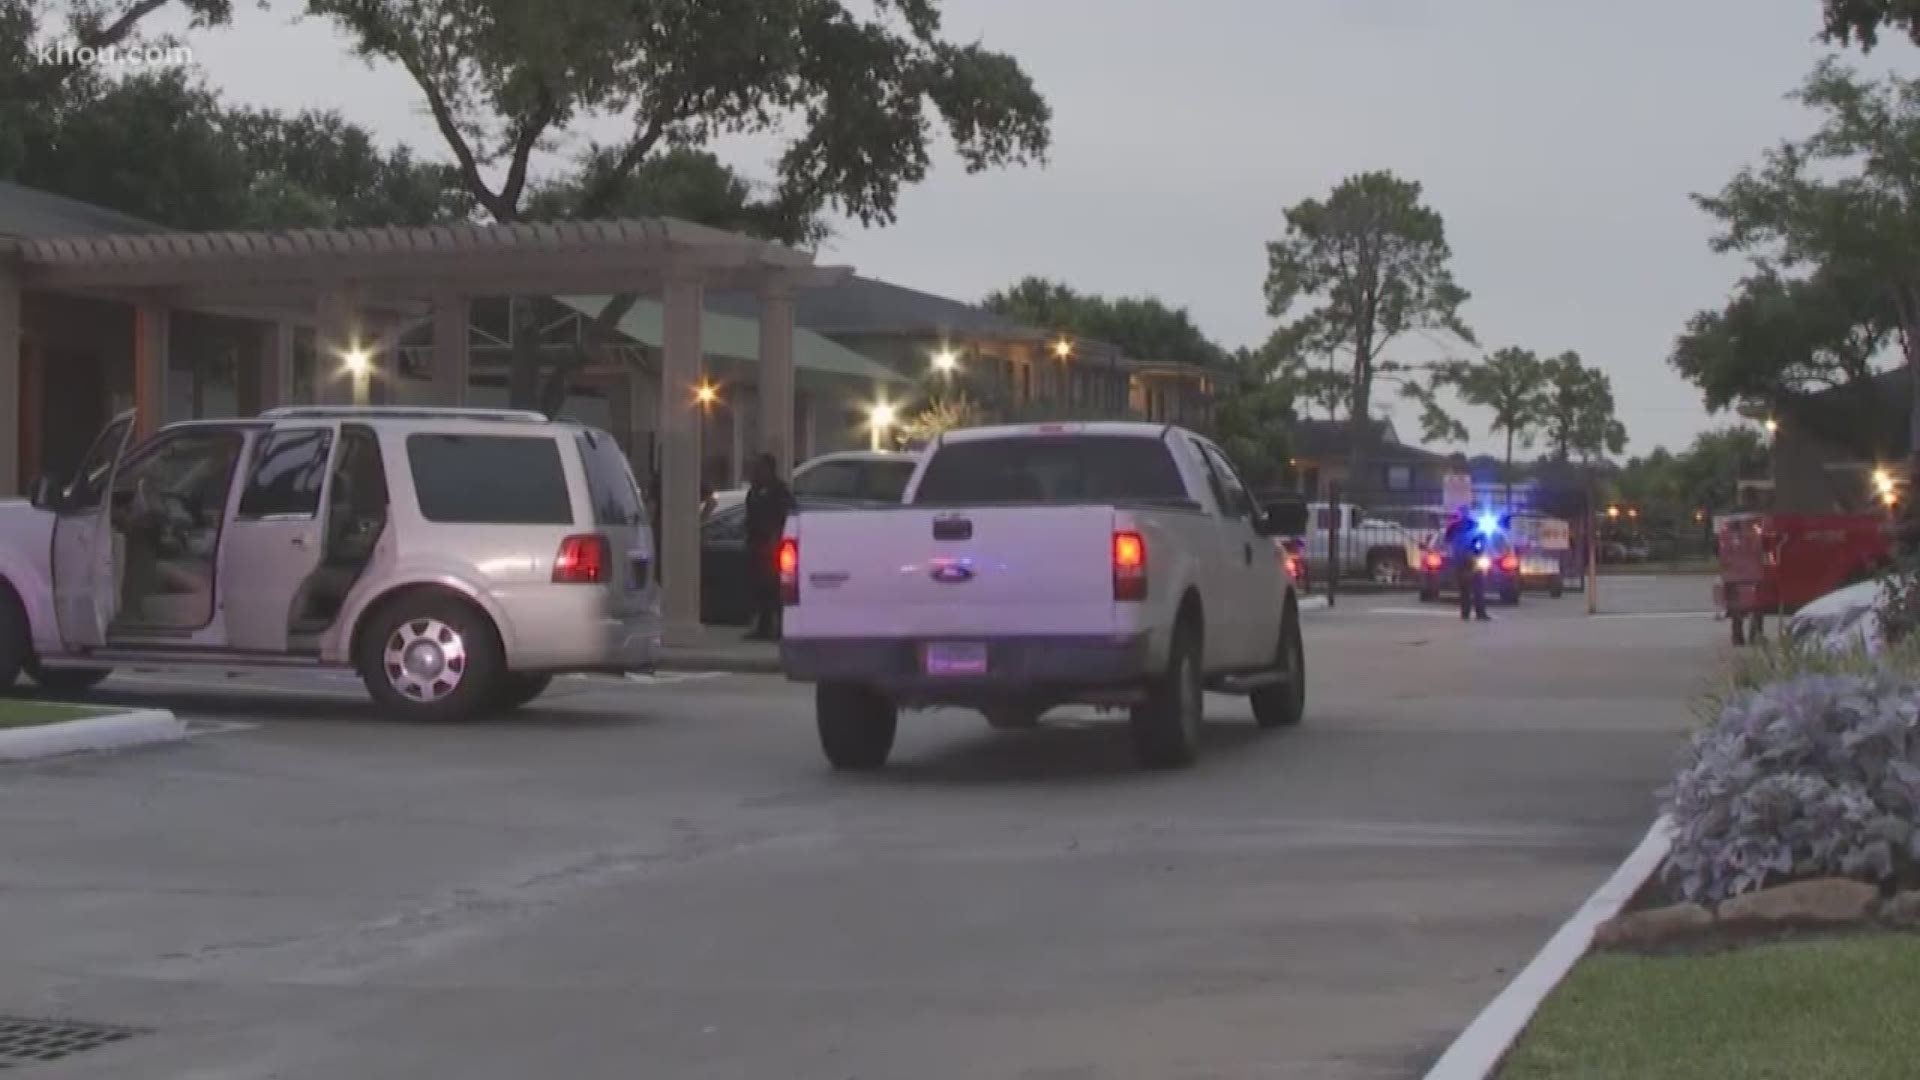 A 3-year-old dies in a tragic accident, a possible Mumps outbreak has been reported in the Harris Co. jail and a man is shot on W. 34th St., these are some of the top headlines from #HTownRush at 5 a.m.